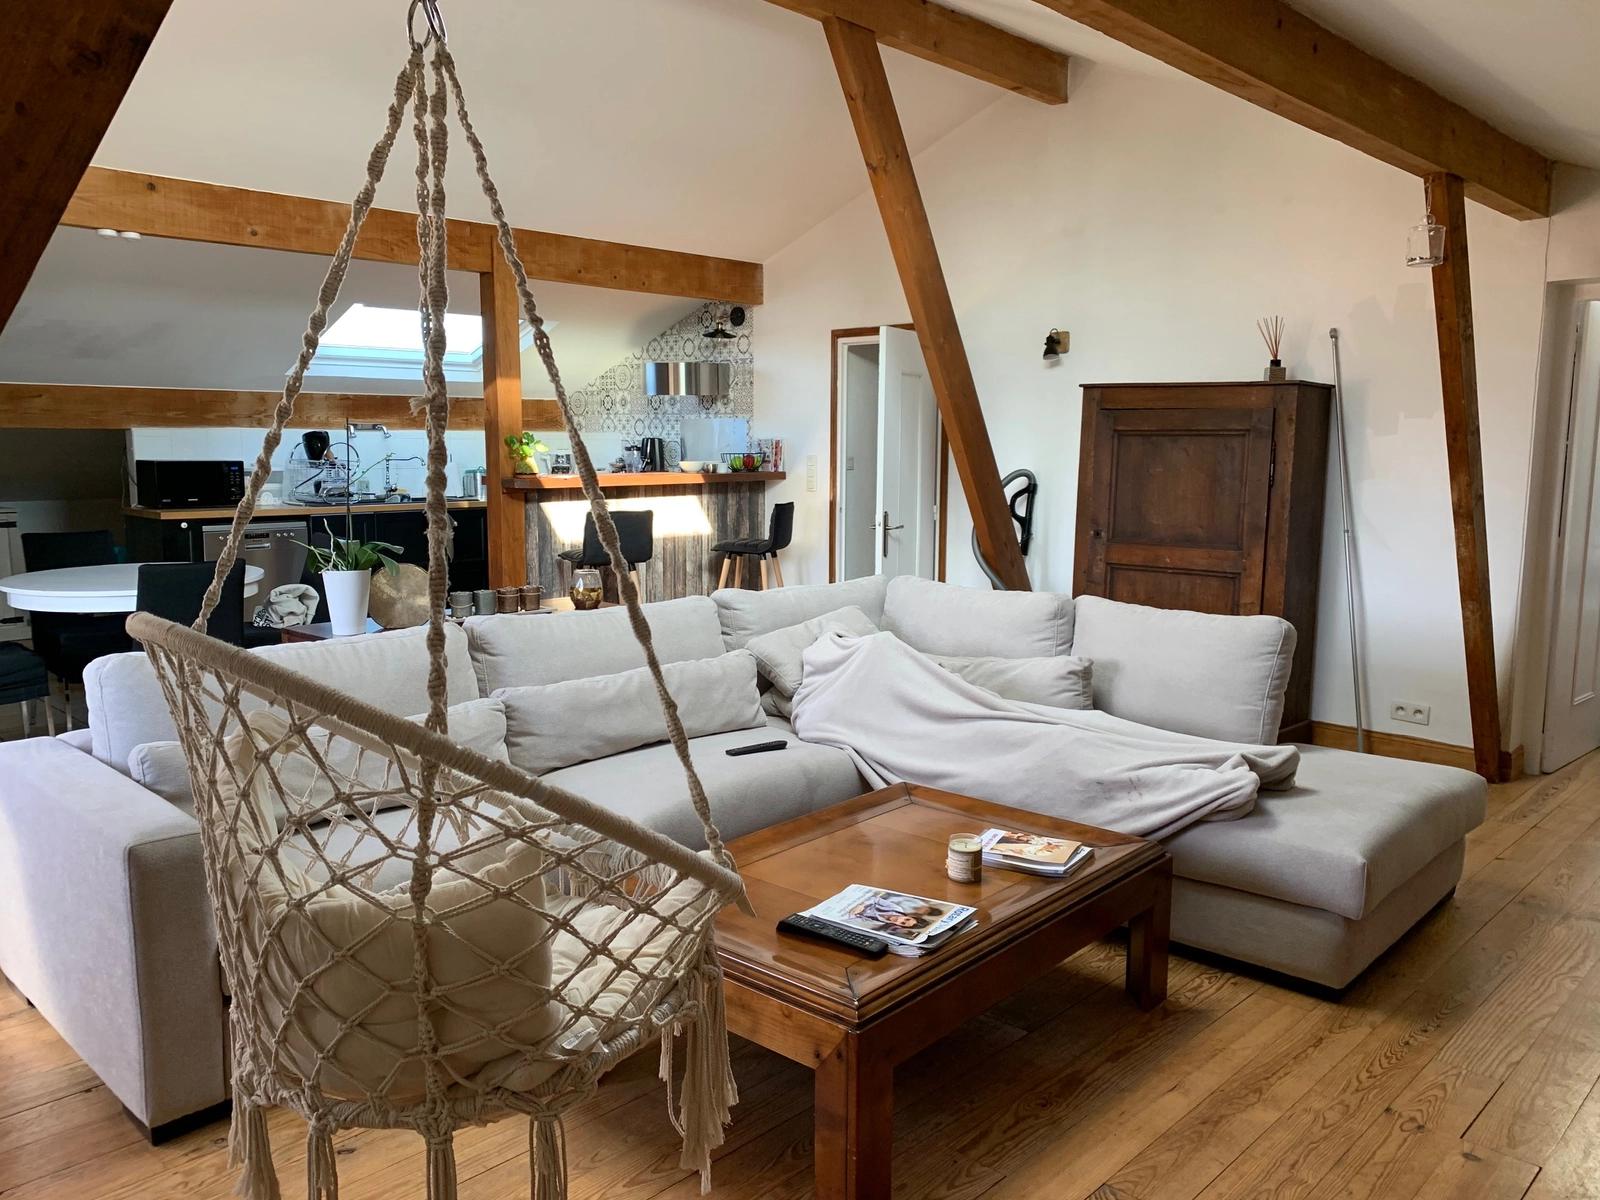 Bedroom in Cocooning area with views of the Monts du Lyonnais - 1